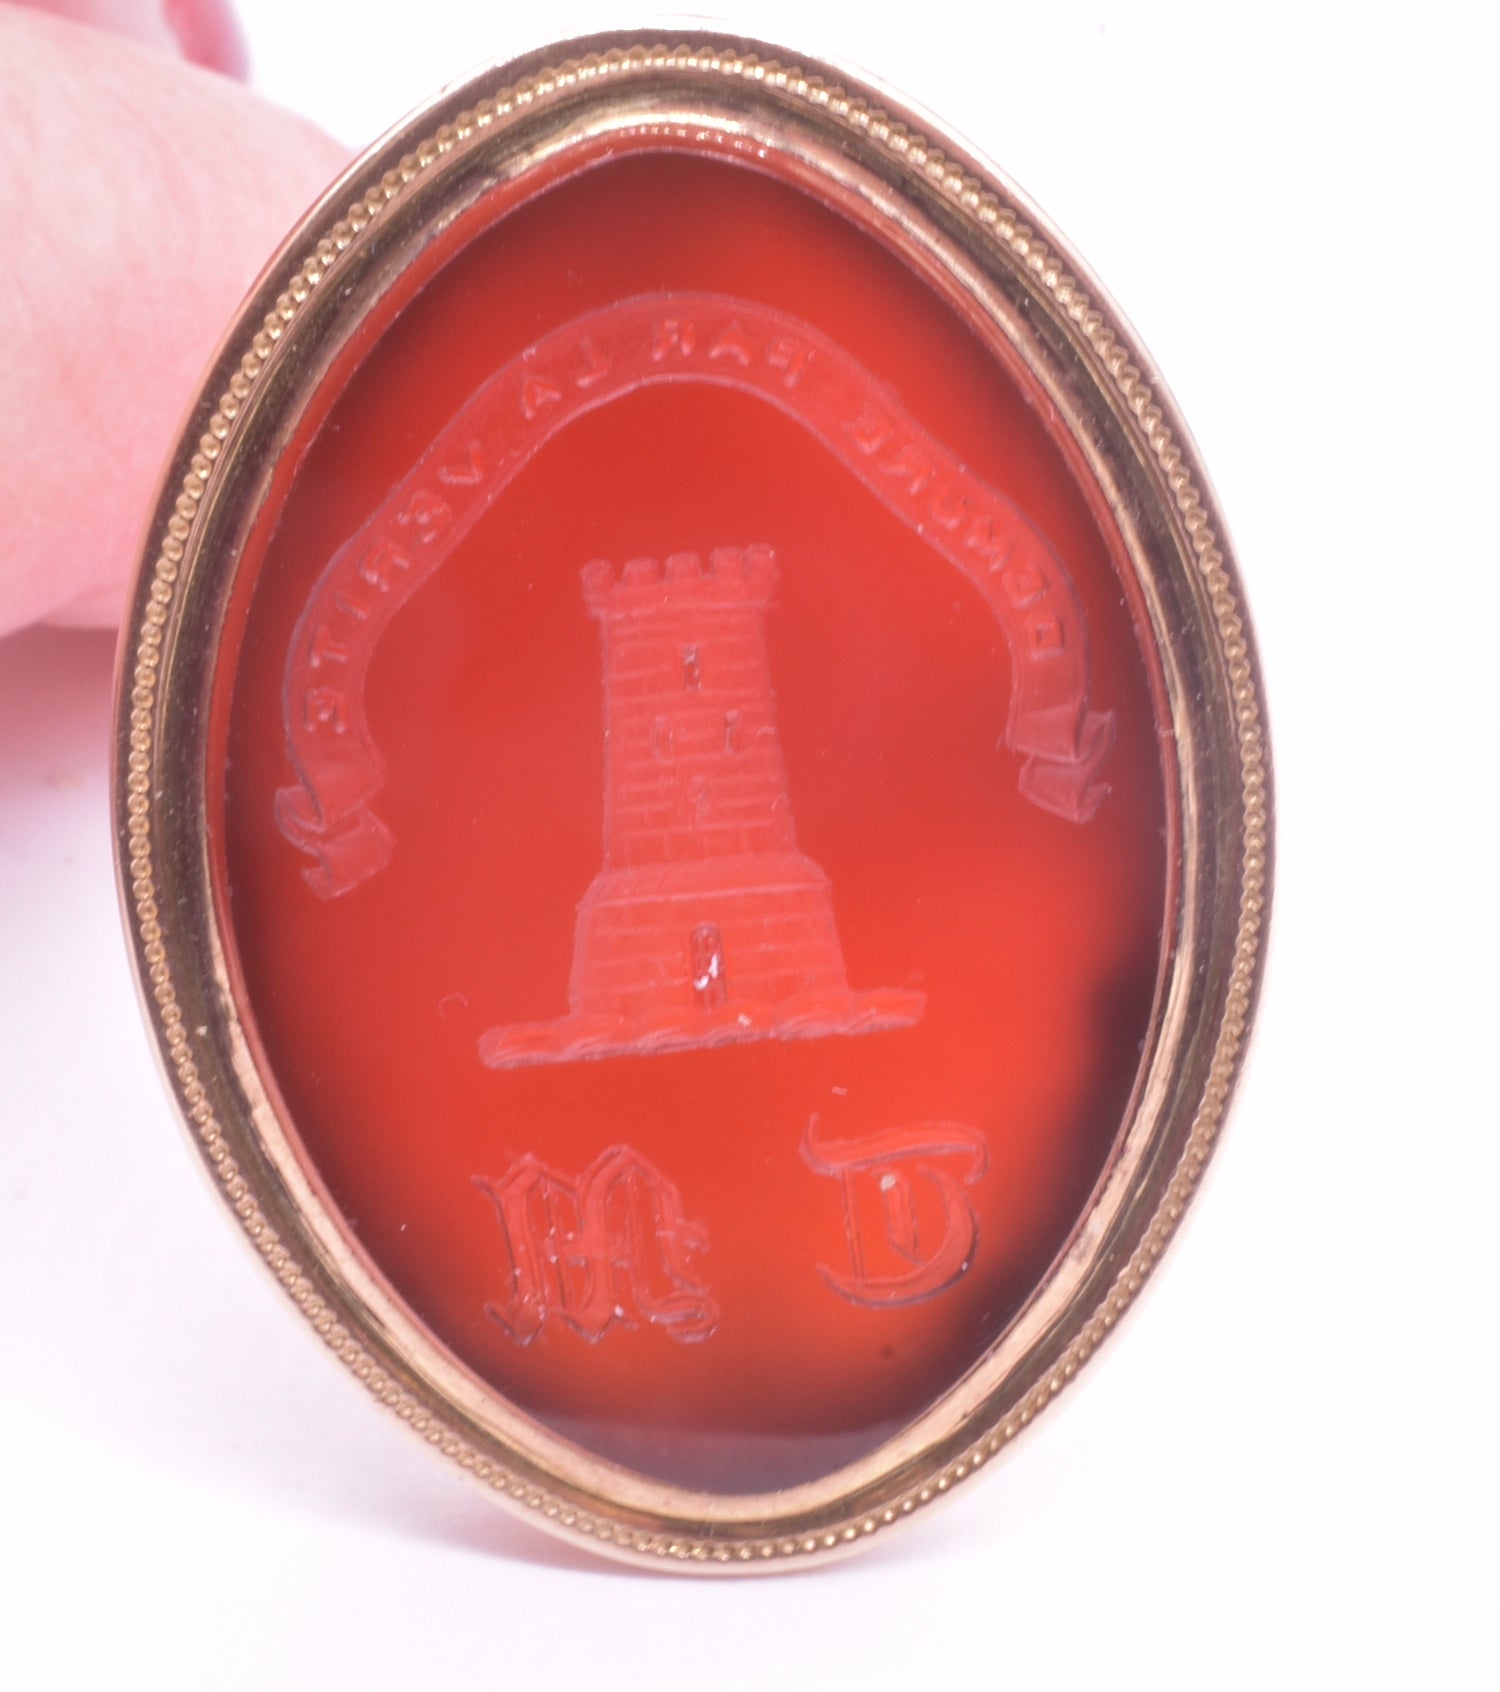 Our 18K Scottish fob features an imposing stone tower, the crest for the Mason surname. The fob reads 